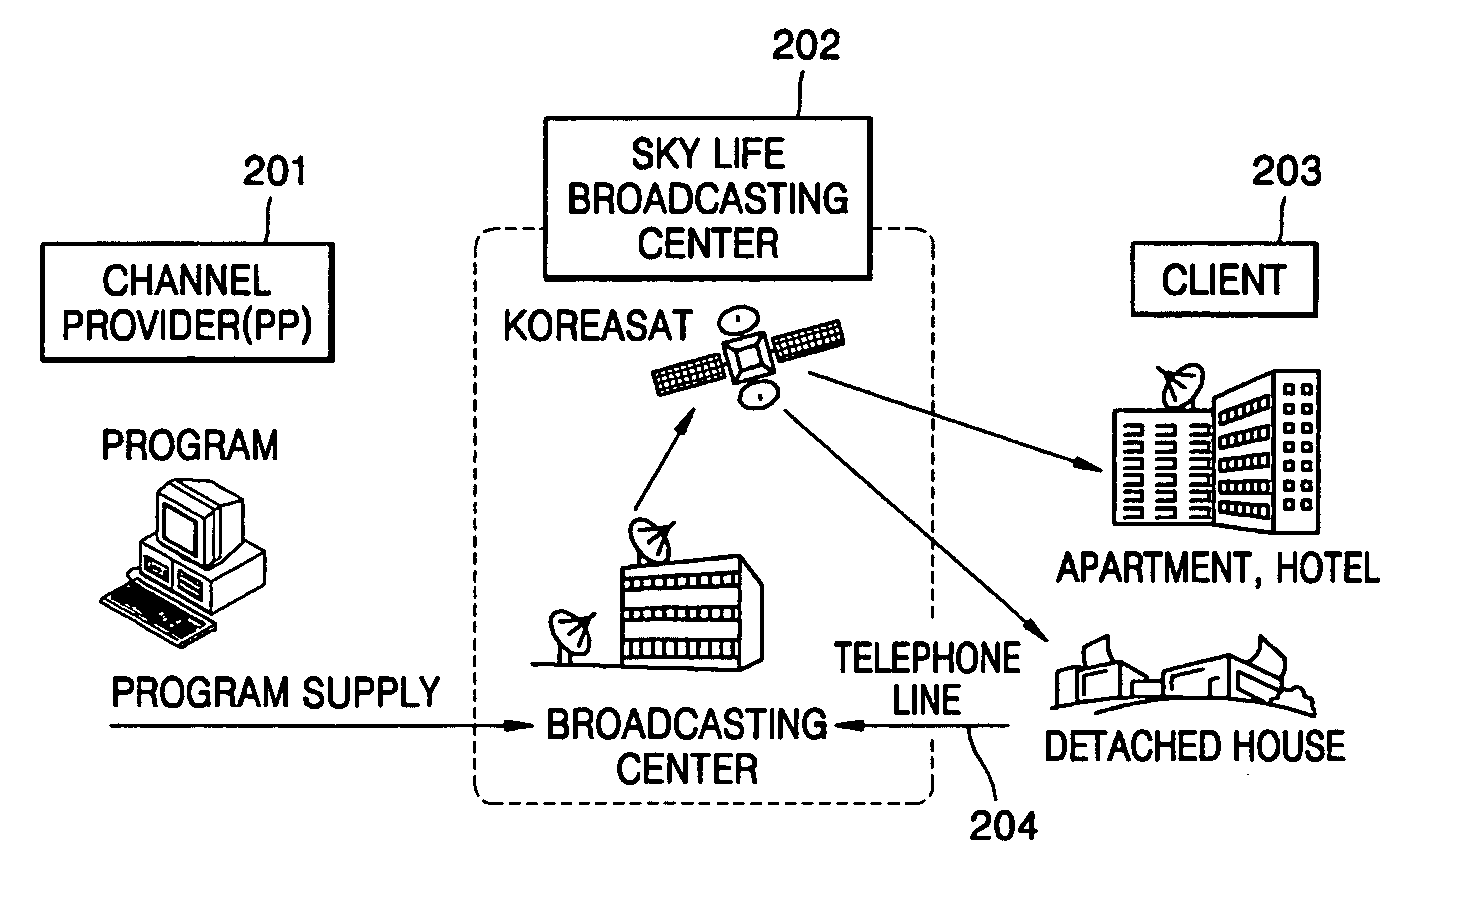 System and method of providing integrated communications and broadcasting service